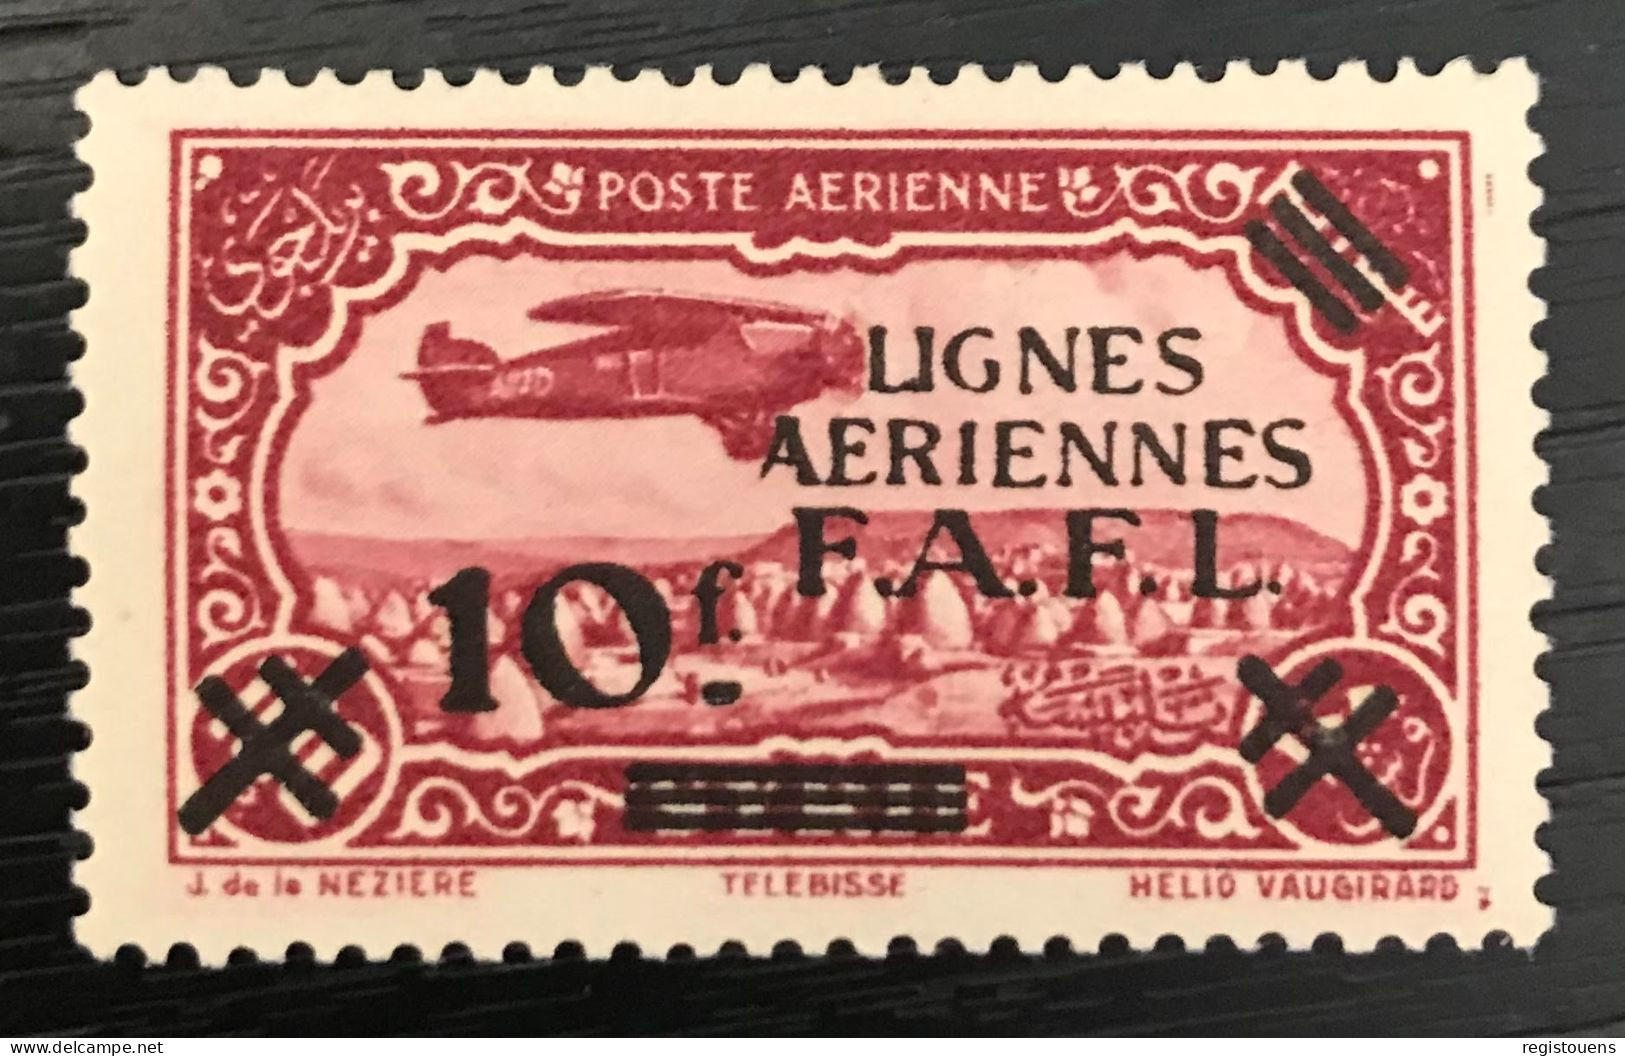 Timbre Neuf** Levant Timbre Poste Aérienne - Unused Stamps